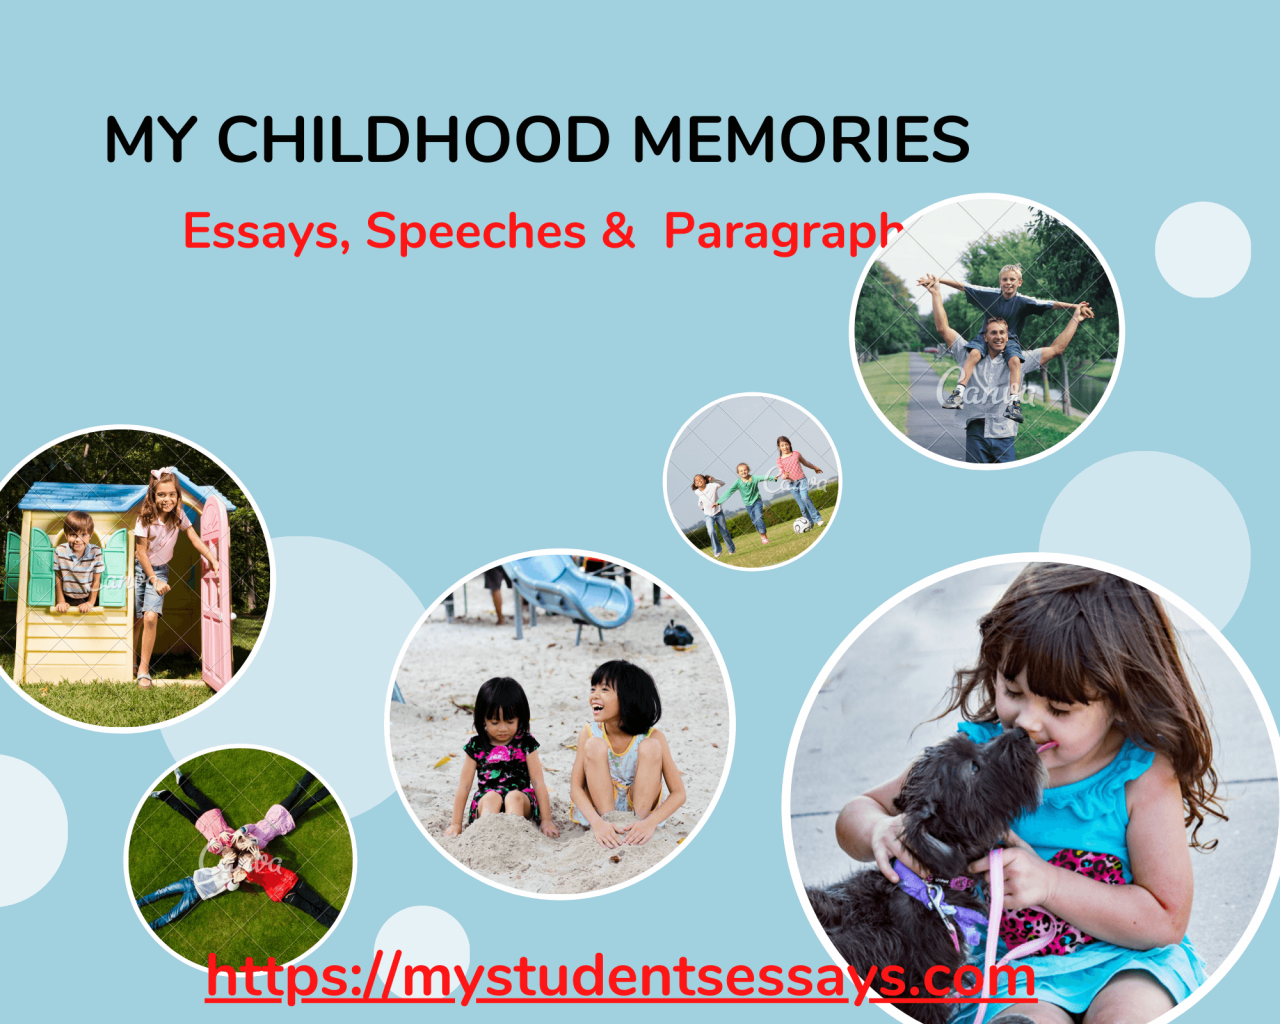 An essay about childhood memories